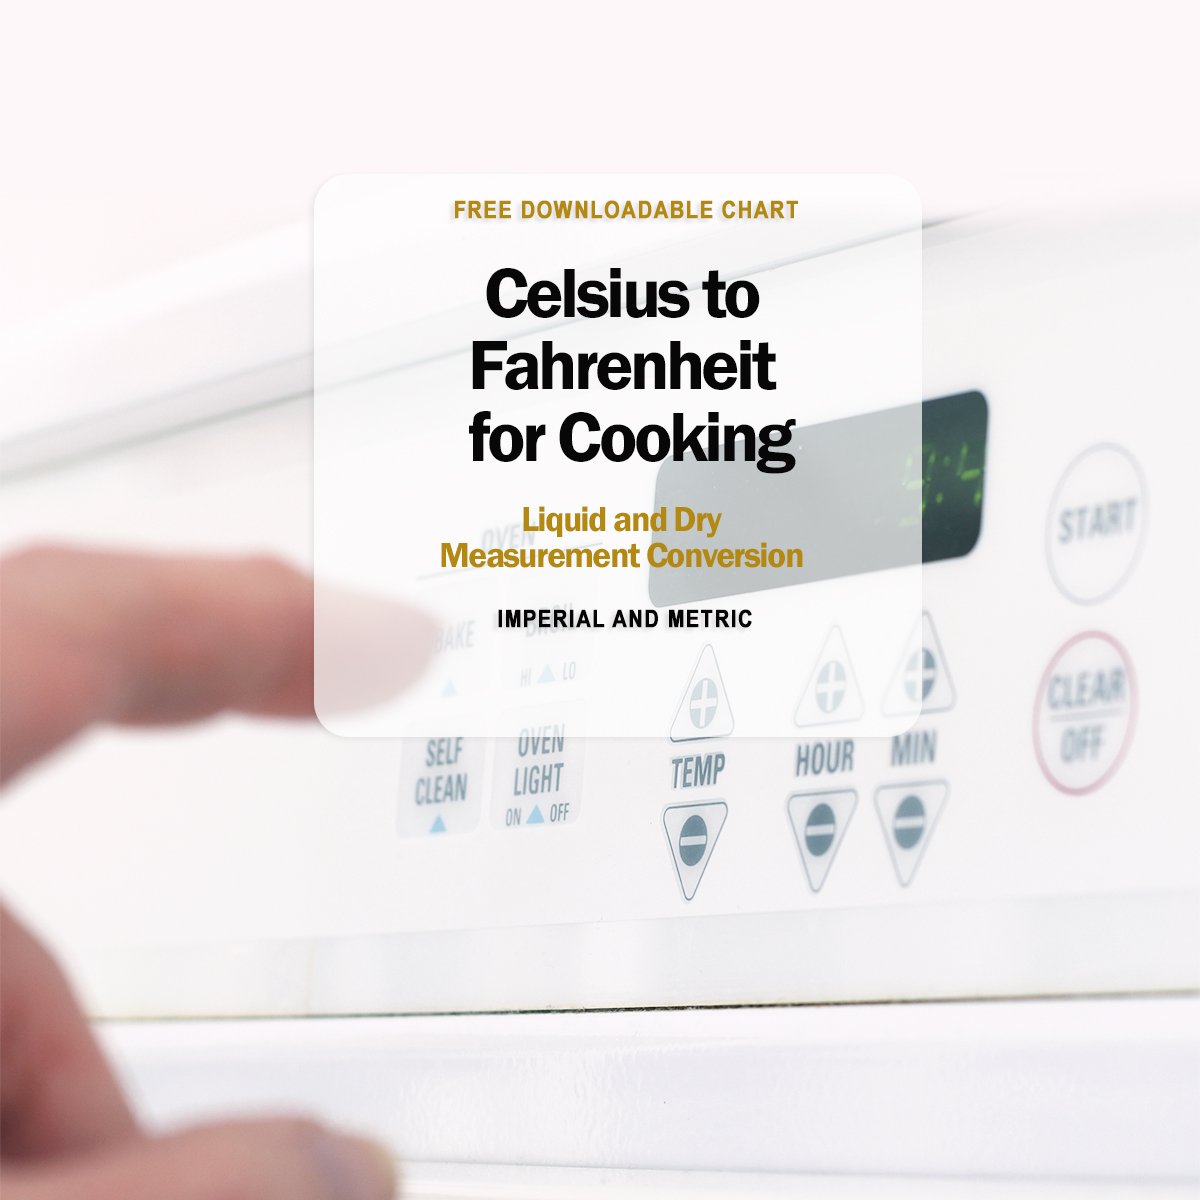 Celsius to Fahrenheit for Cooking (Free Chart)